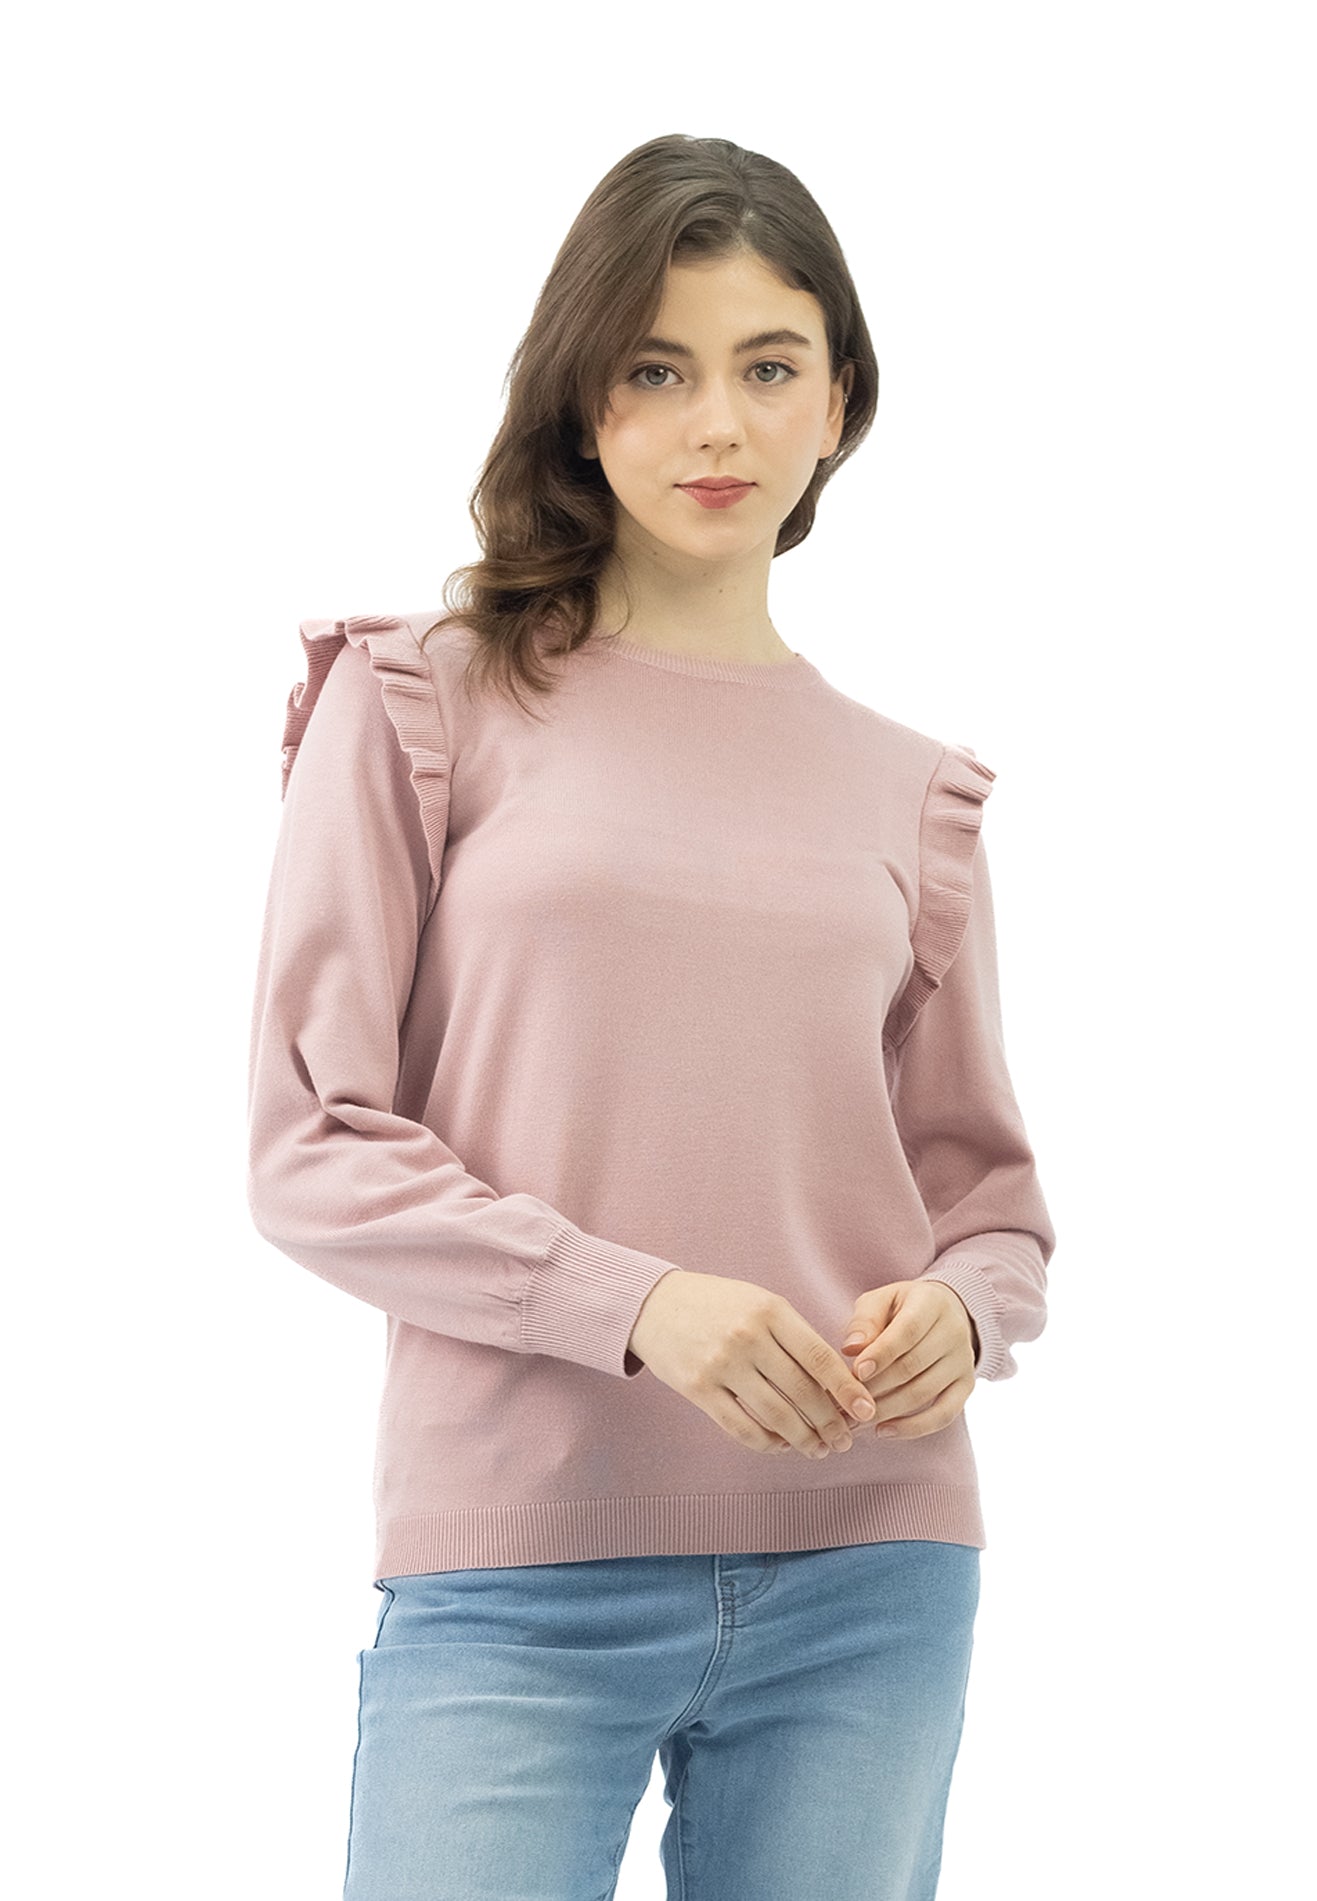 DAISY By VOIR Ruffles Trim Cable Knit Top